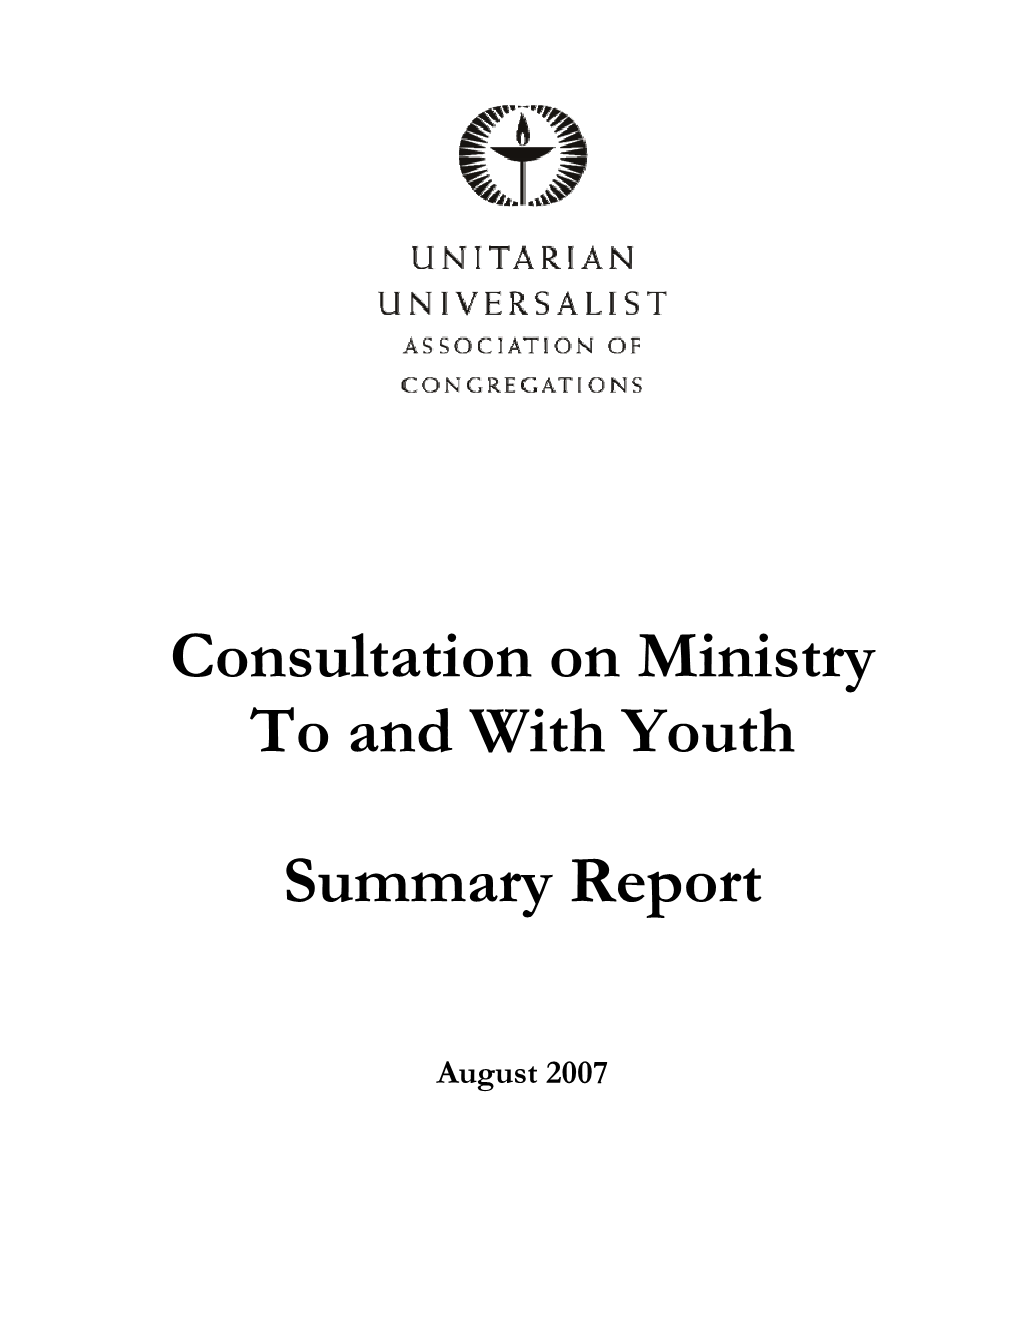 Consultation on Ministry to and with Youth